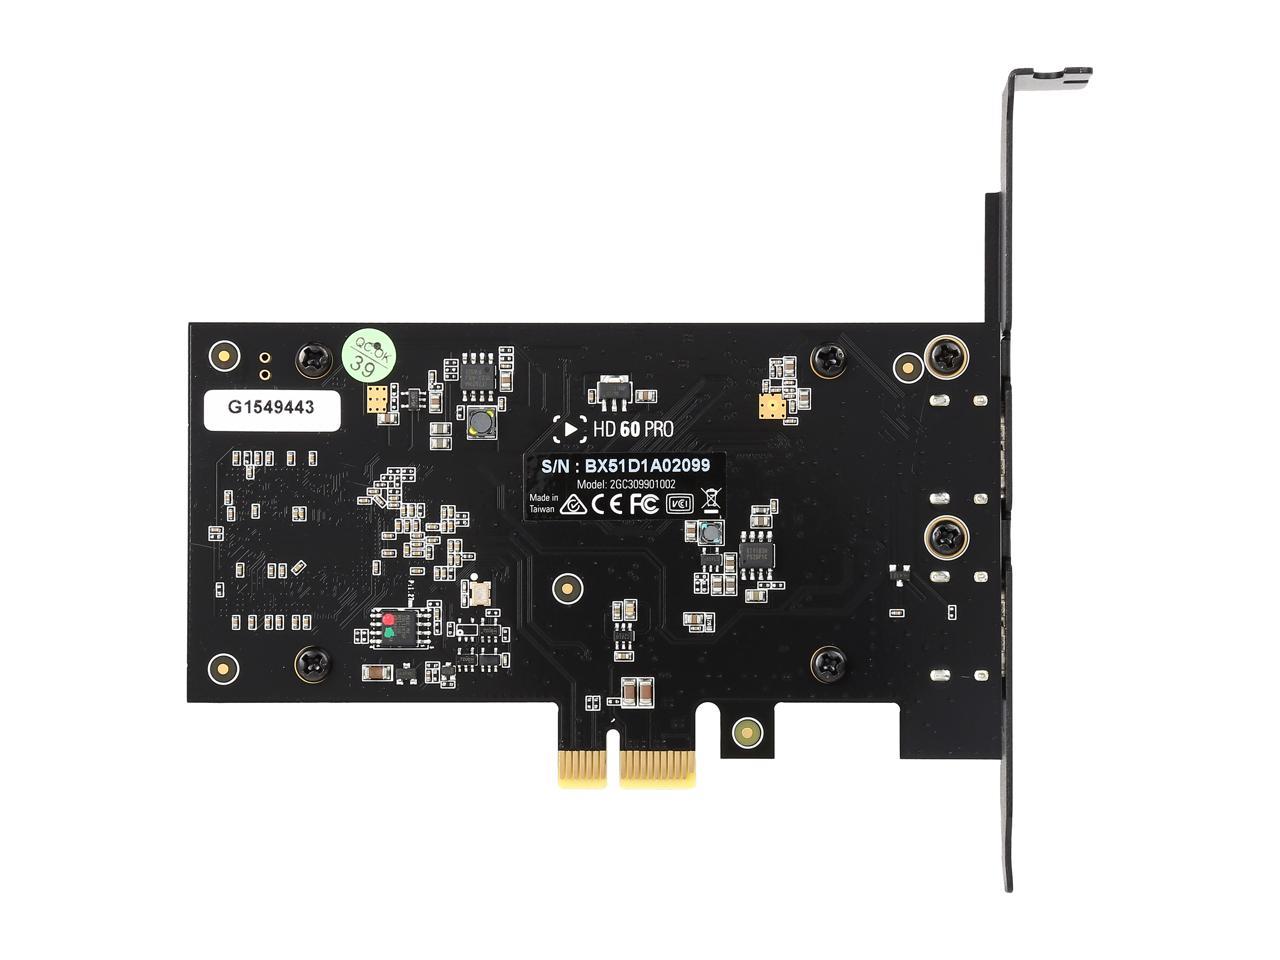 Elgato Game Capture Hd60 Pro Pcie Capture Card Stream And